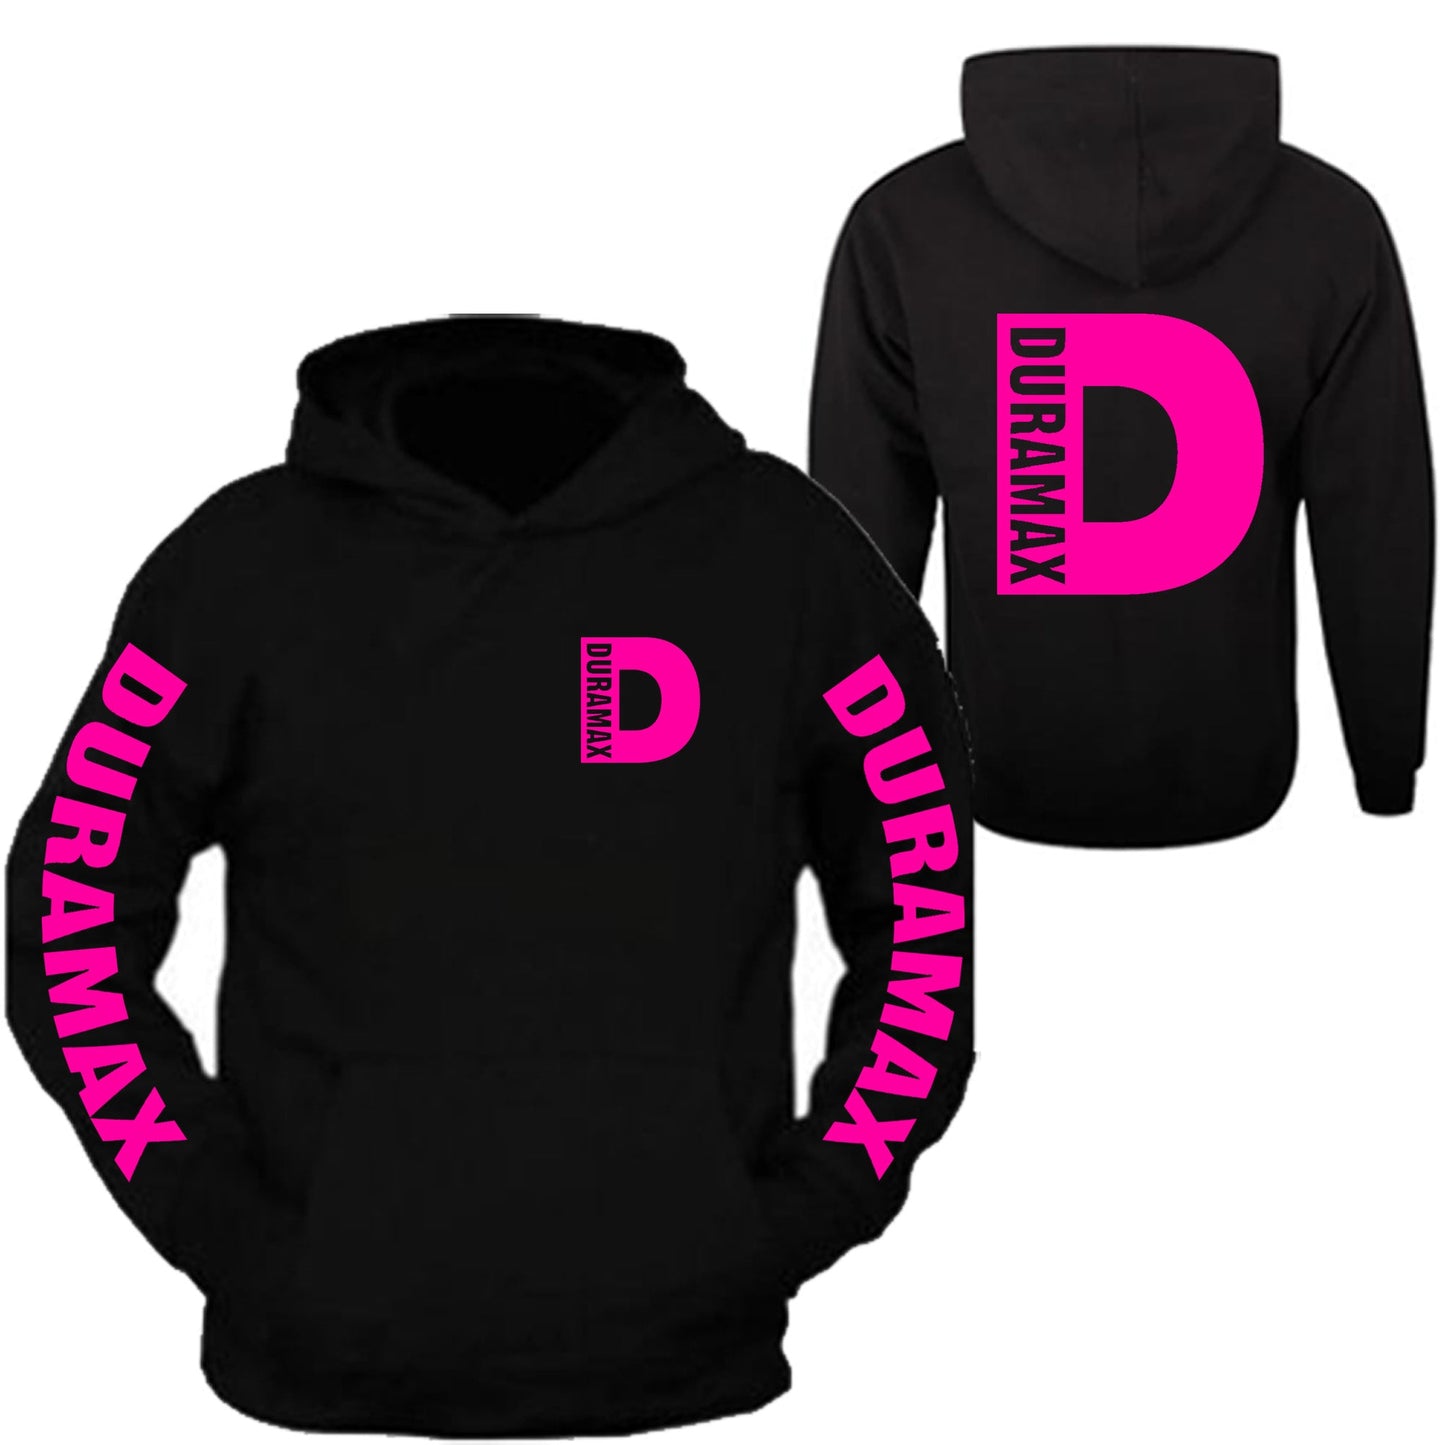 Duramax Hoodie Sweatshirt All Sizes All Colors Front and Back